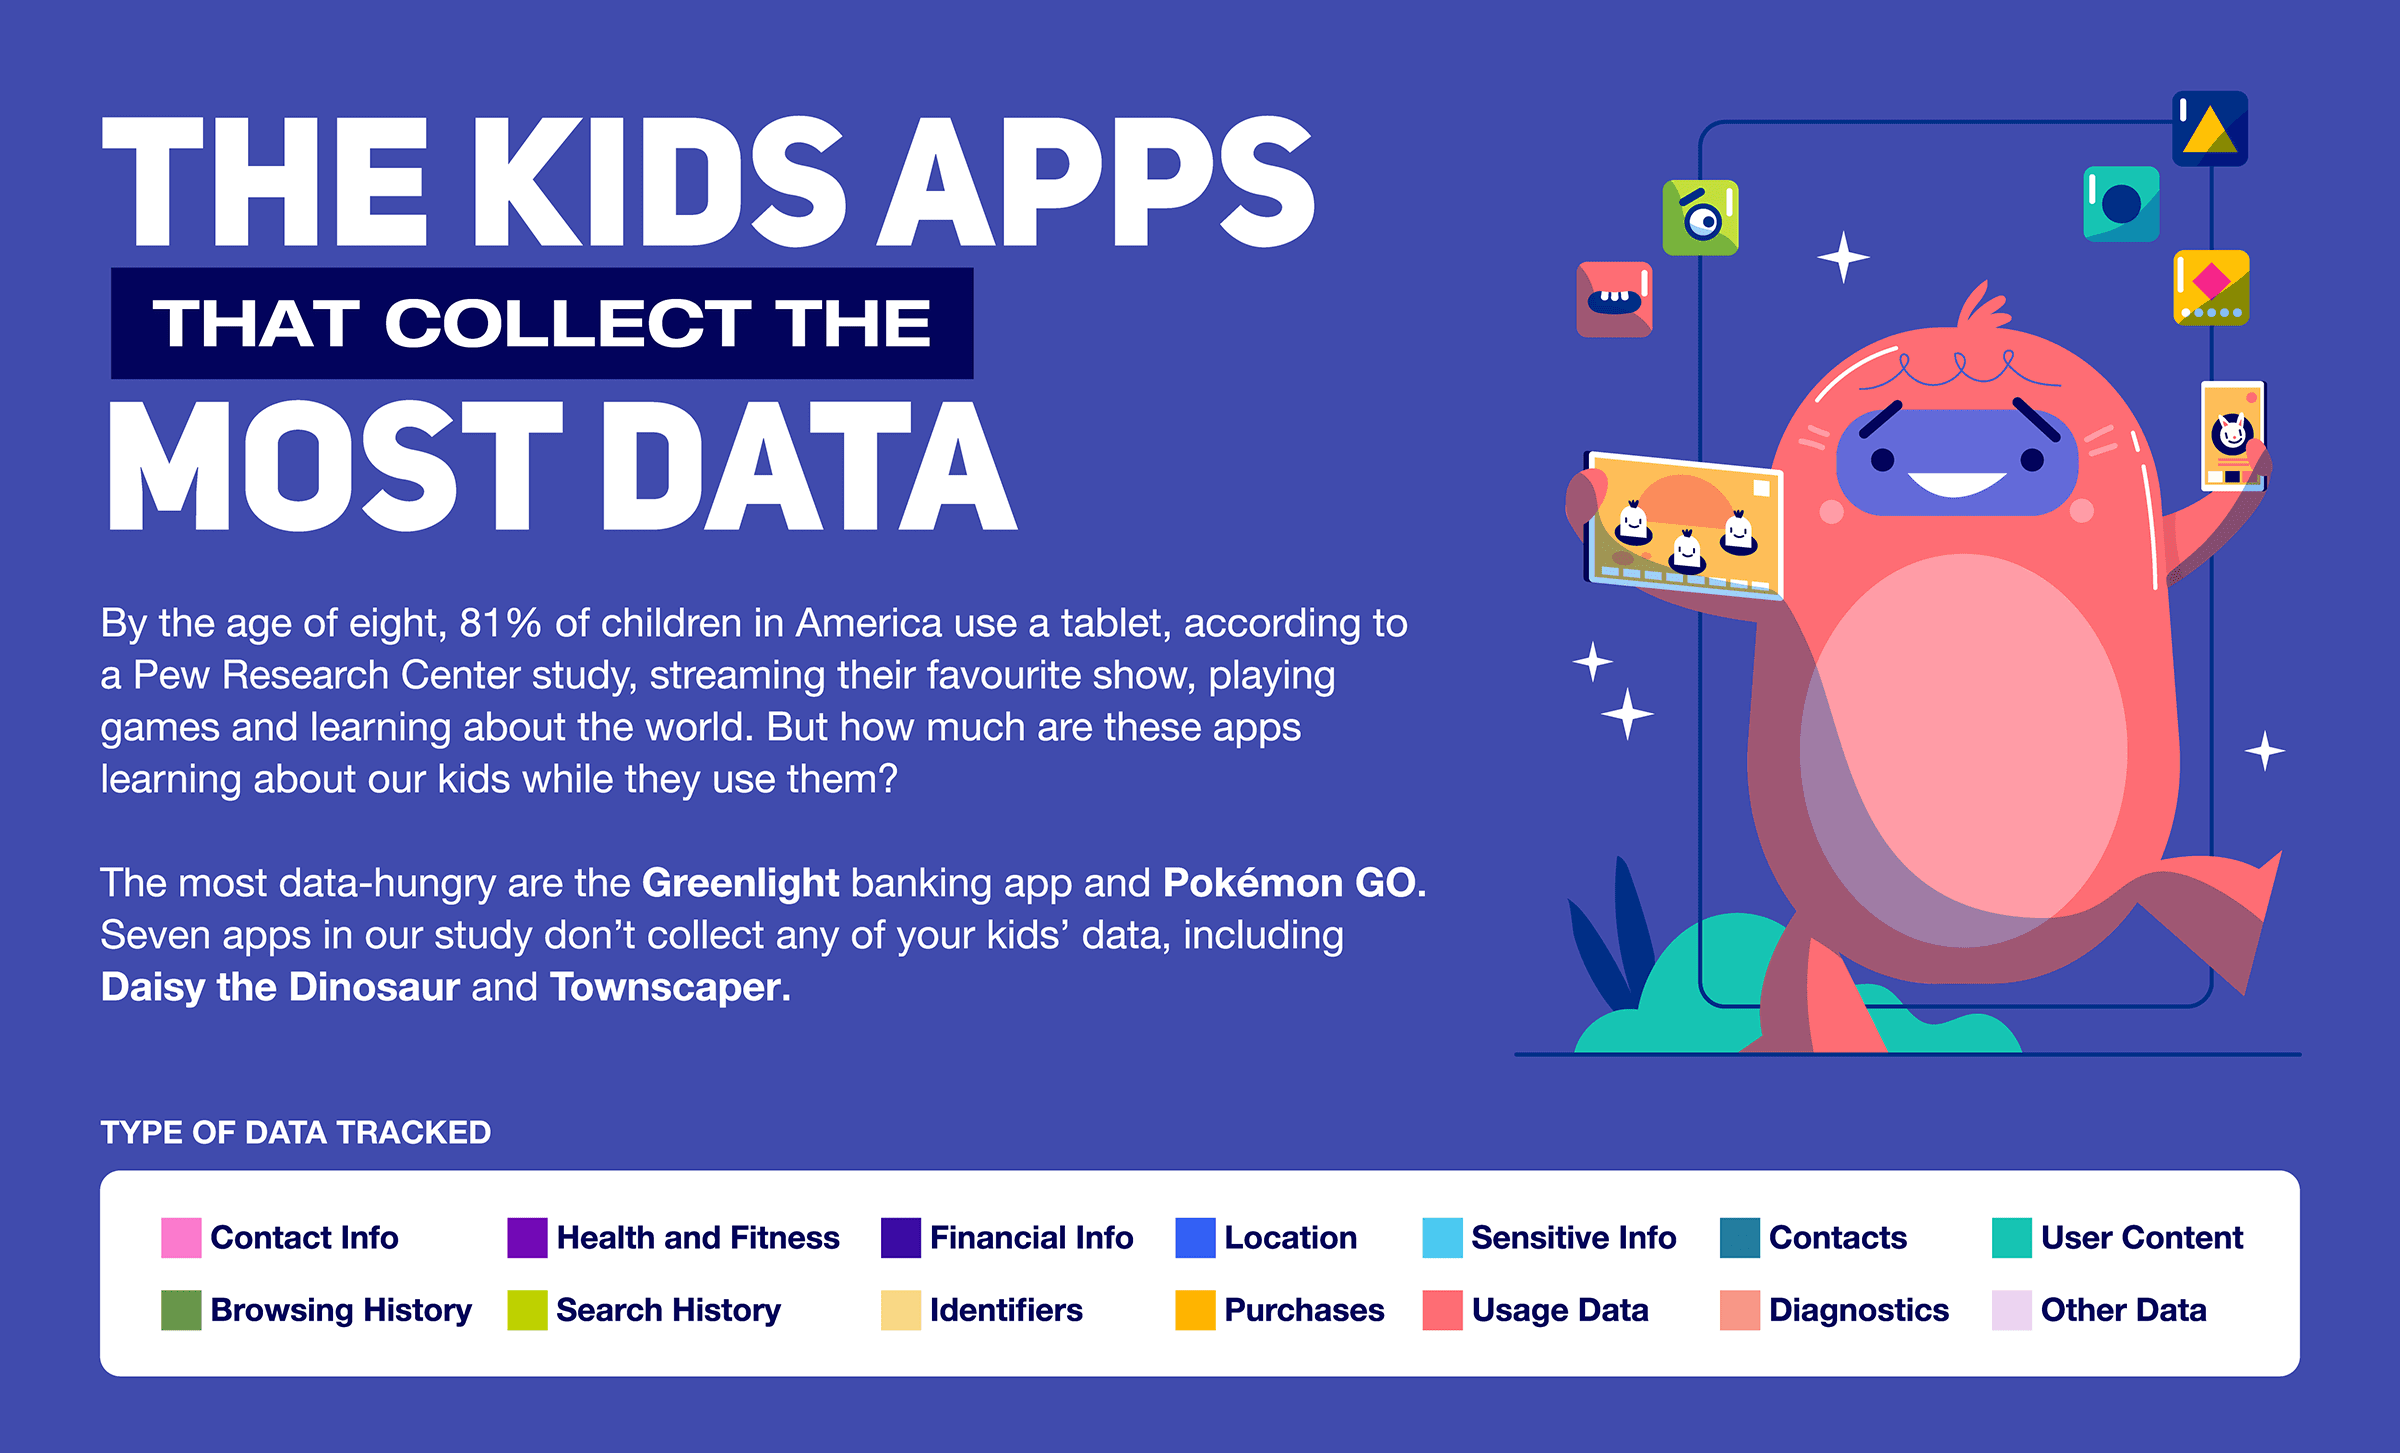 These kids apps collect the most personal data